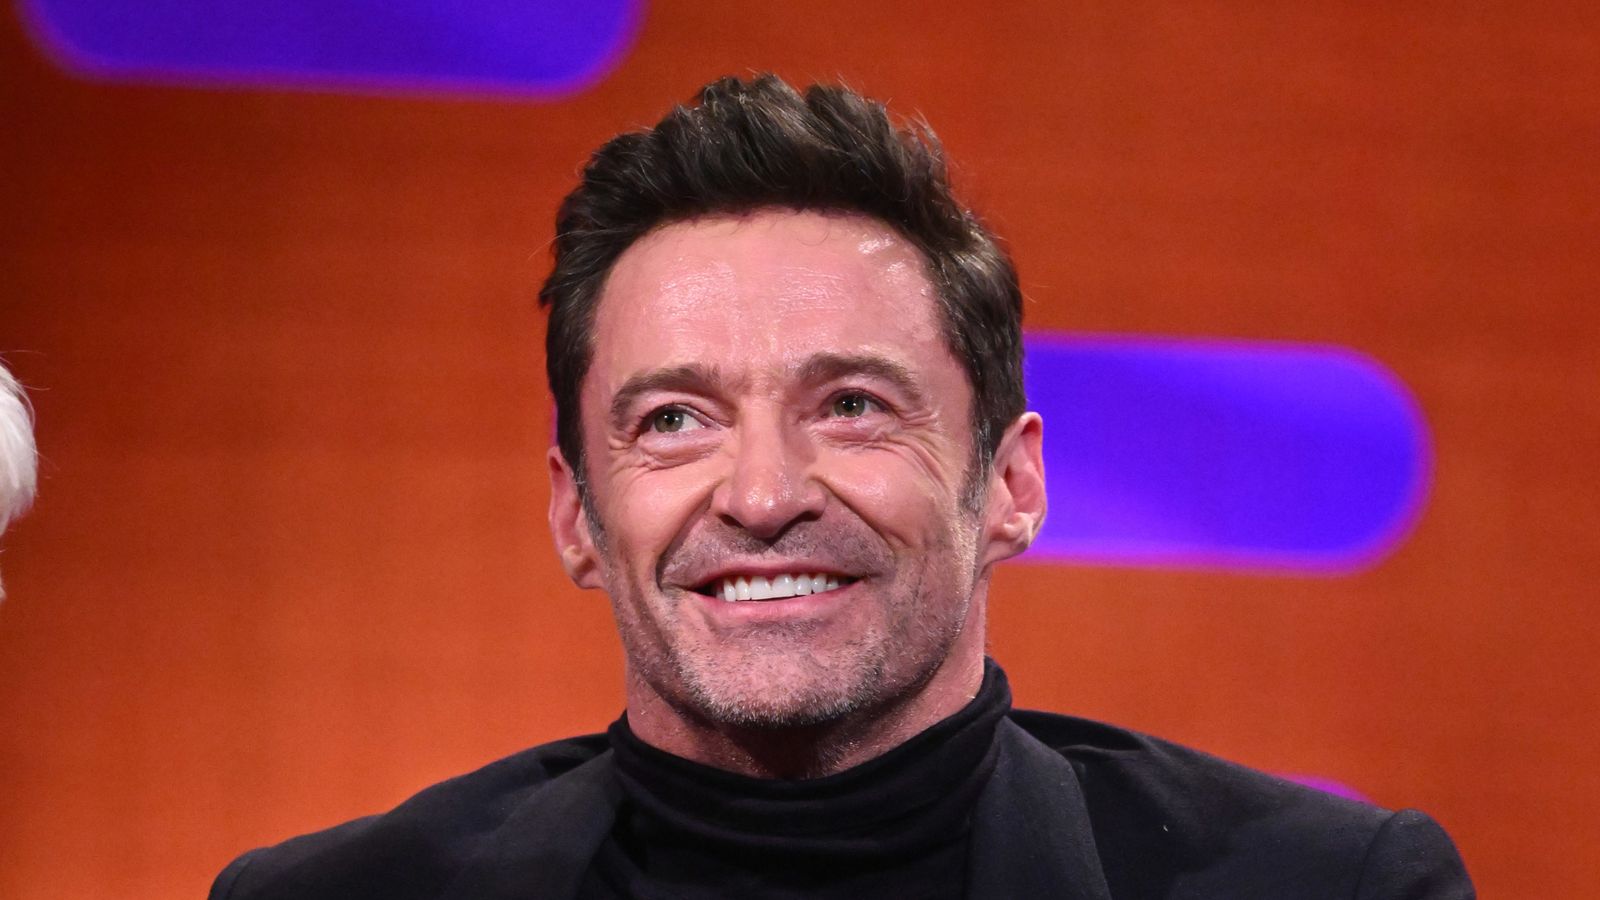 Hugh Jackman says it's 'inevitable' that Australia will become a republic - 'it feels natural'